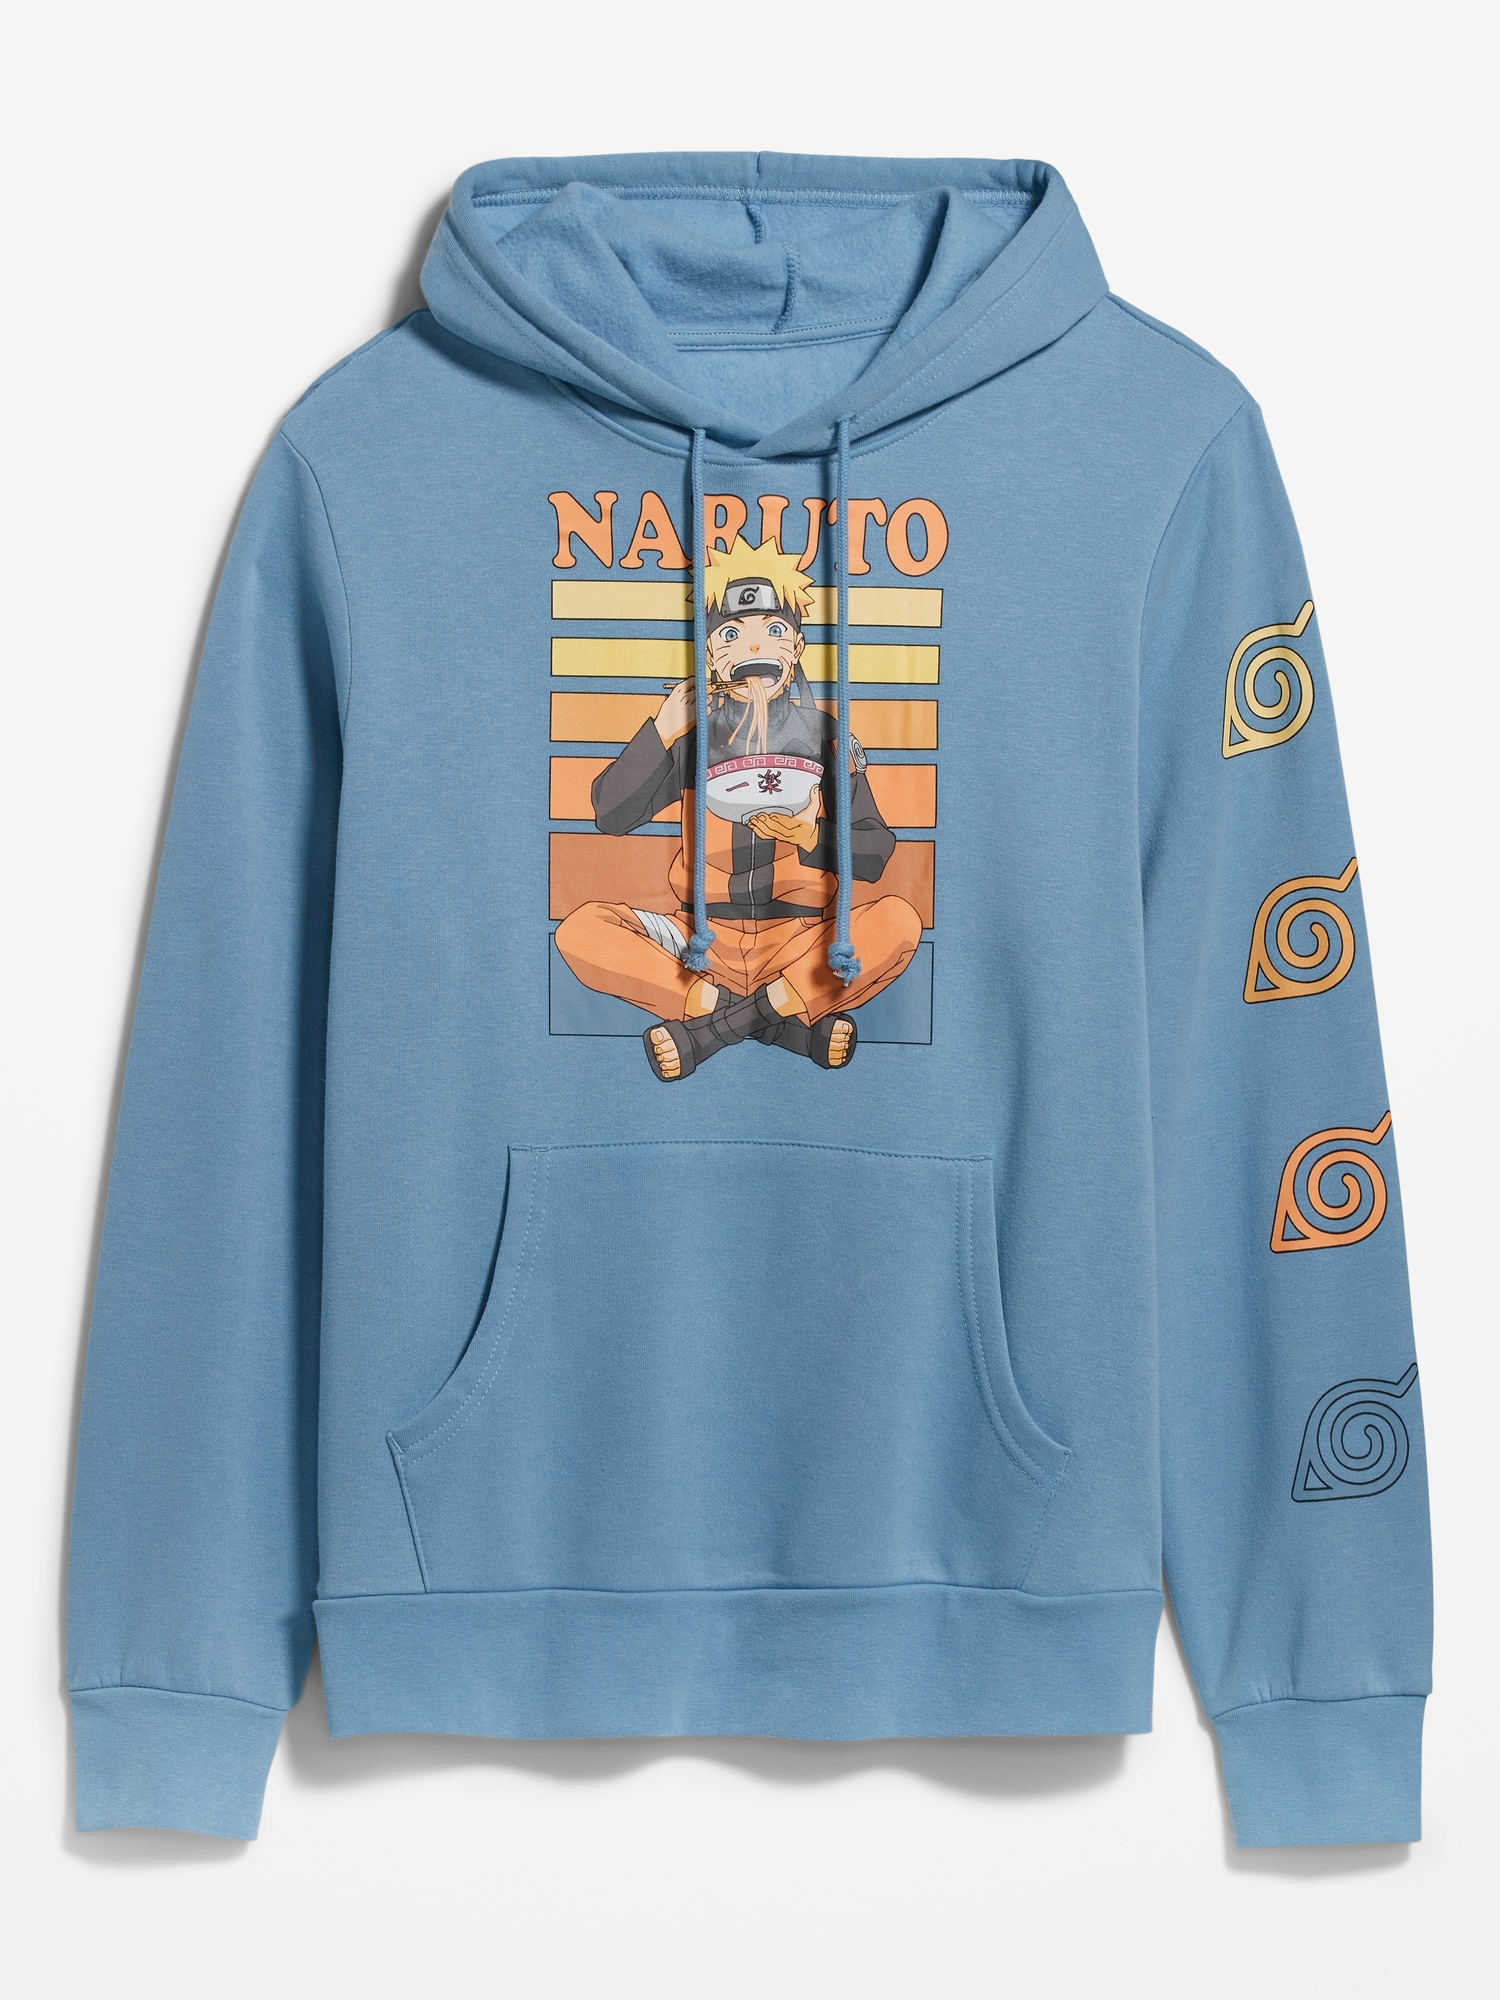 Naruto™ Gender-Neutral Pullover Hoodie for Adults